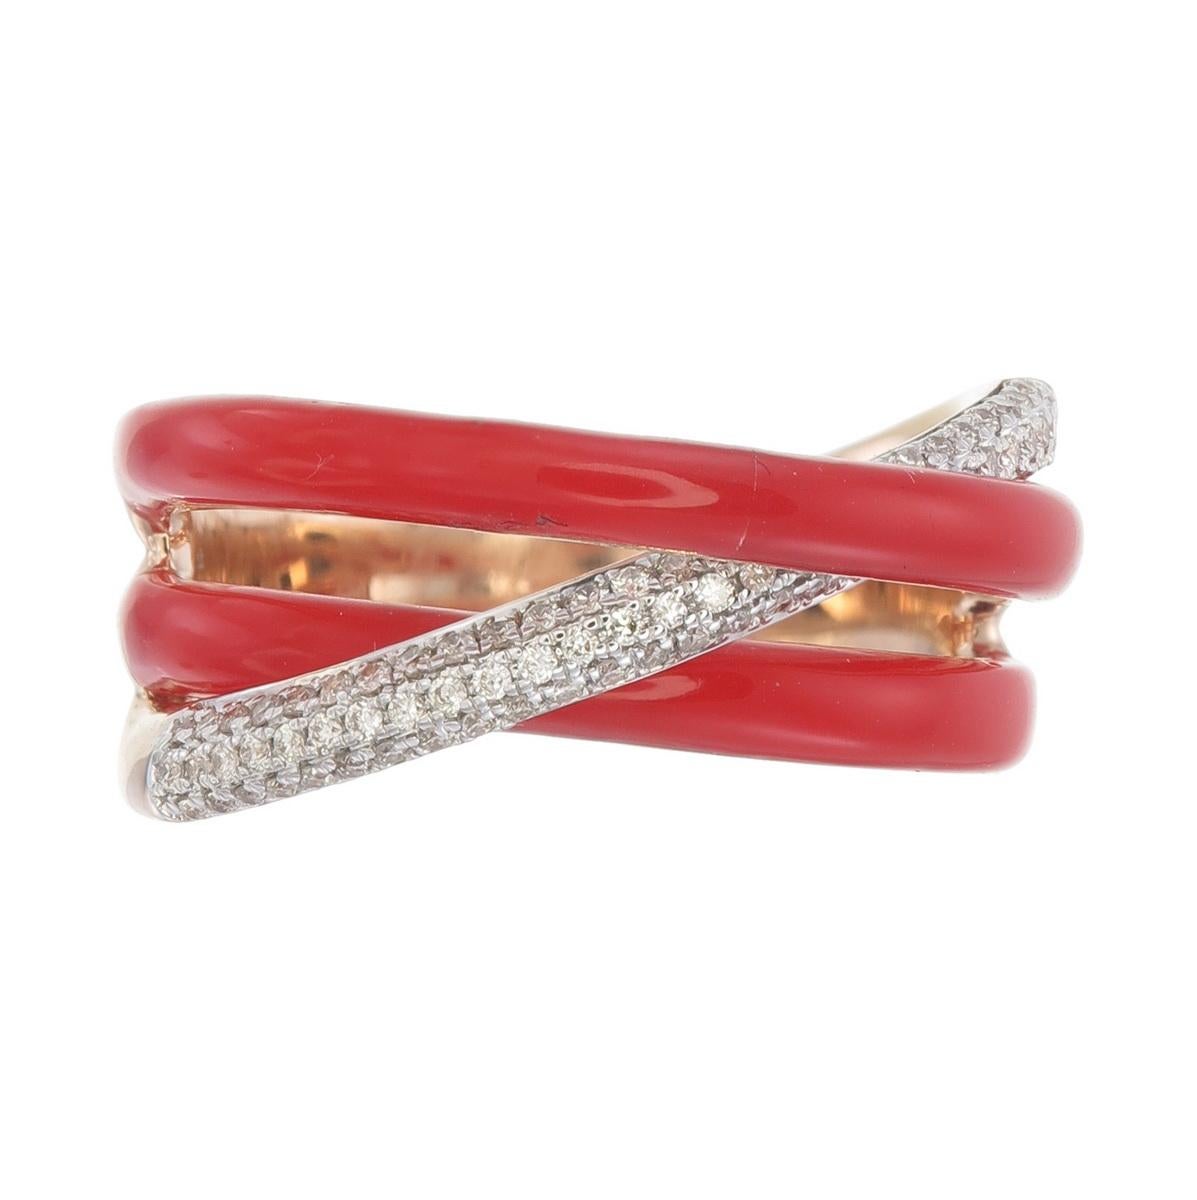 Ring made in 18kt gold with natural diamonds and Red ceramic
5.56 gms is used along with 0.18 carat natural diamonds